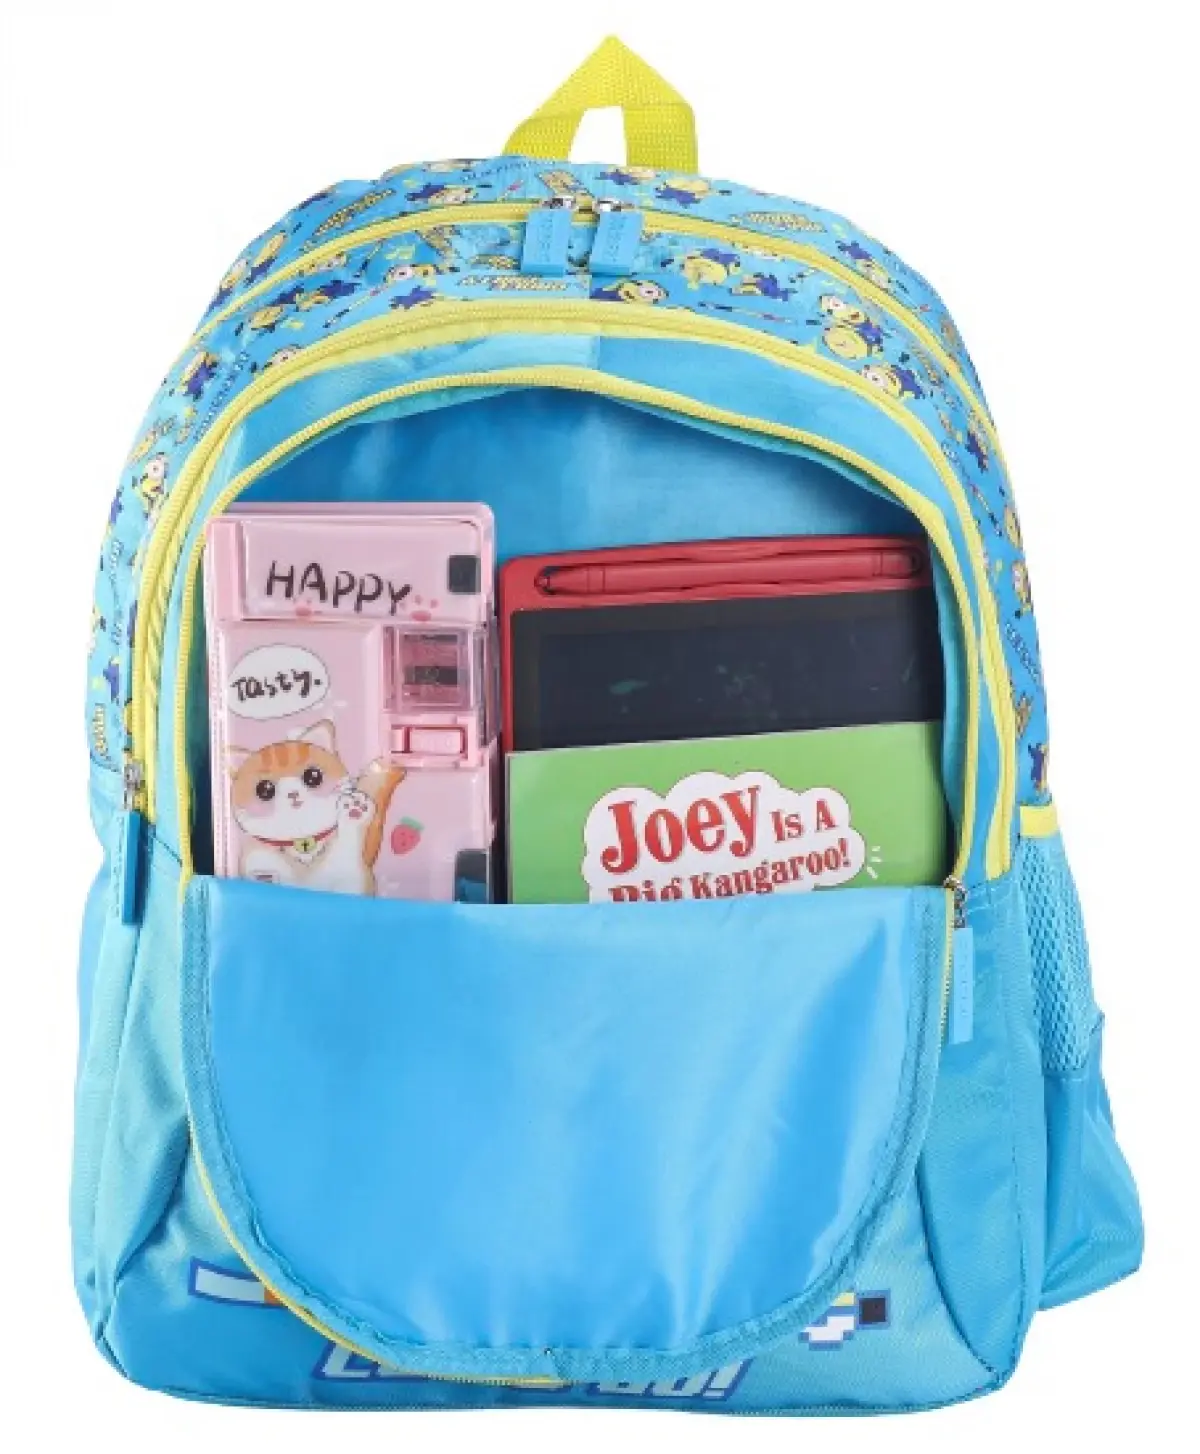 Striders 14 inches Minion Unleash Fun with Our Trendsetting School Bag Multicolour, 3Y+